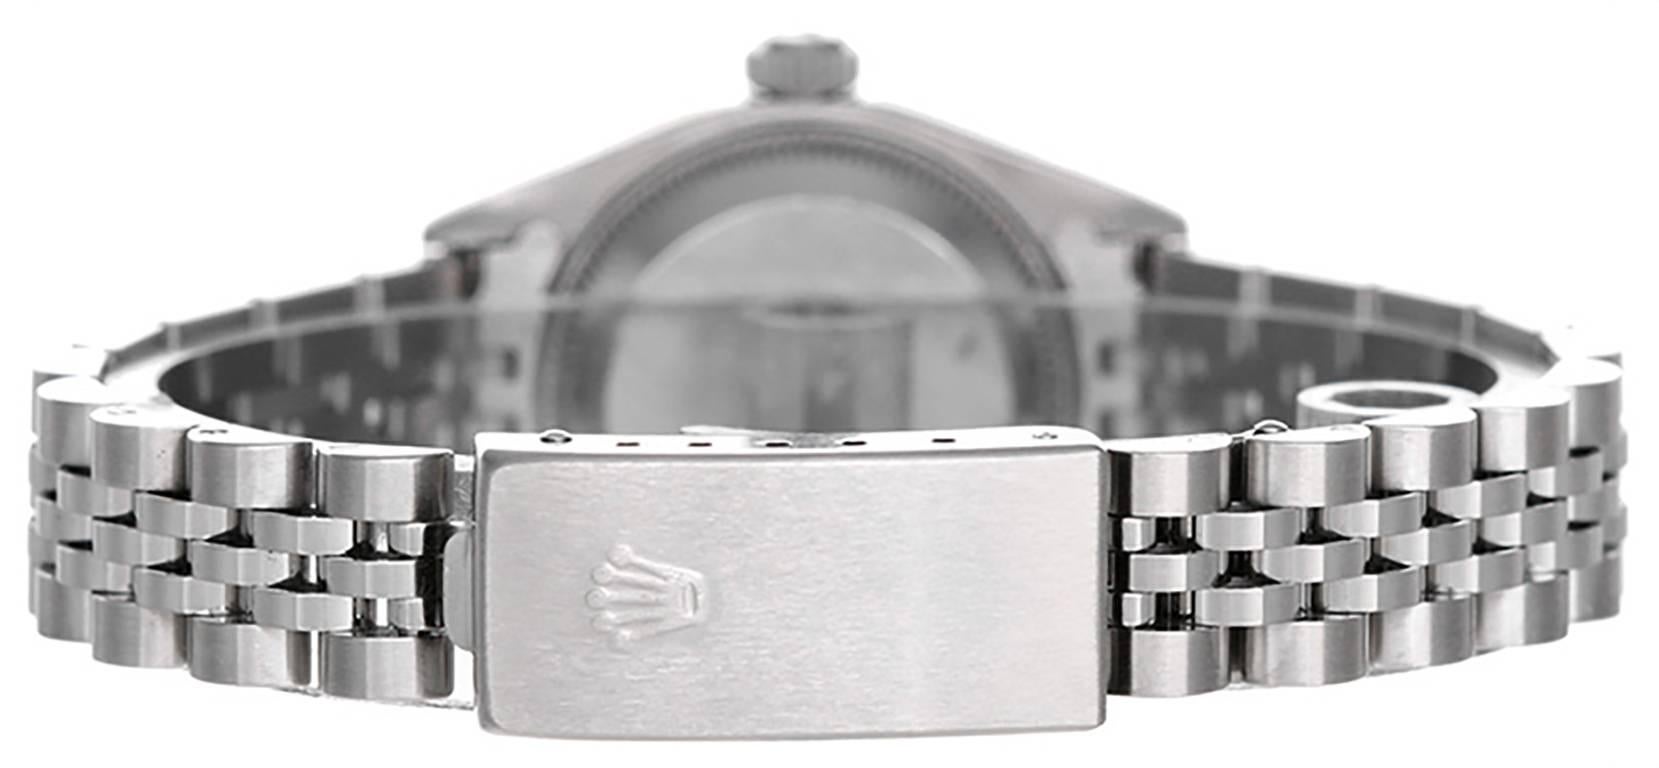 Automatic winding; 31 jewel; sapphire crystal. Stainless steel case with 18k white gold fluted bezel (26mm diameter). Silvered dial with stick markers. Stainless steel Jubilee bracelet. Pre-owned with custom box. Current Replacement Value: $7,250.00